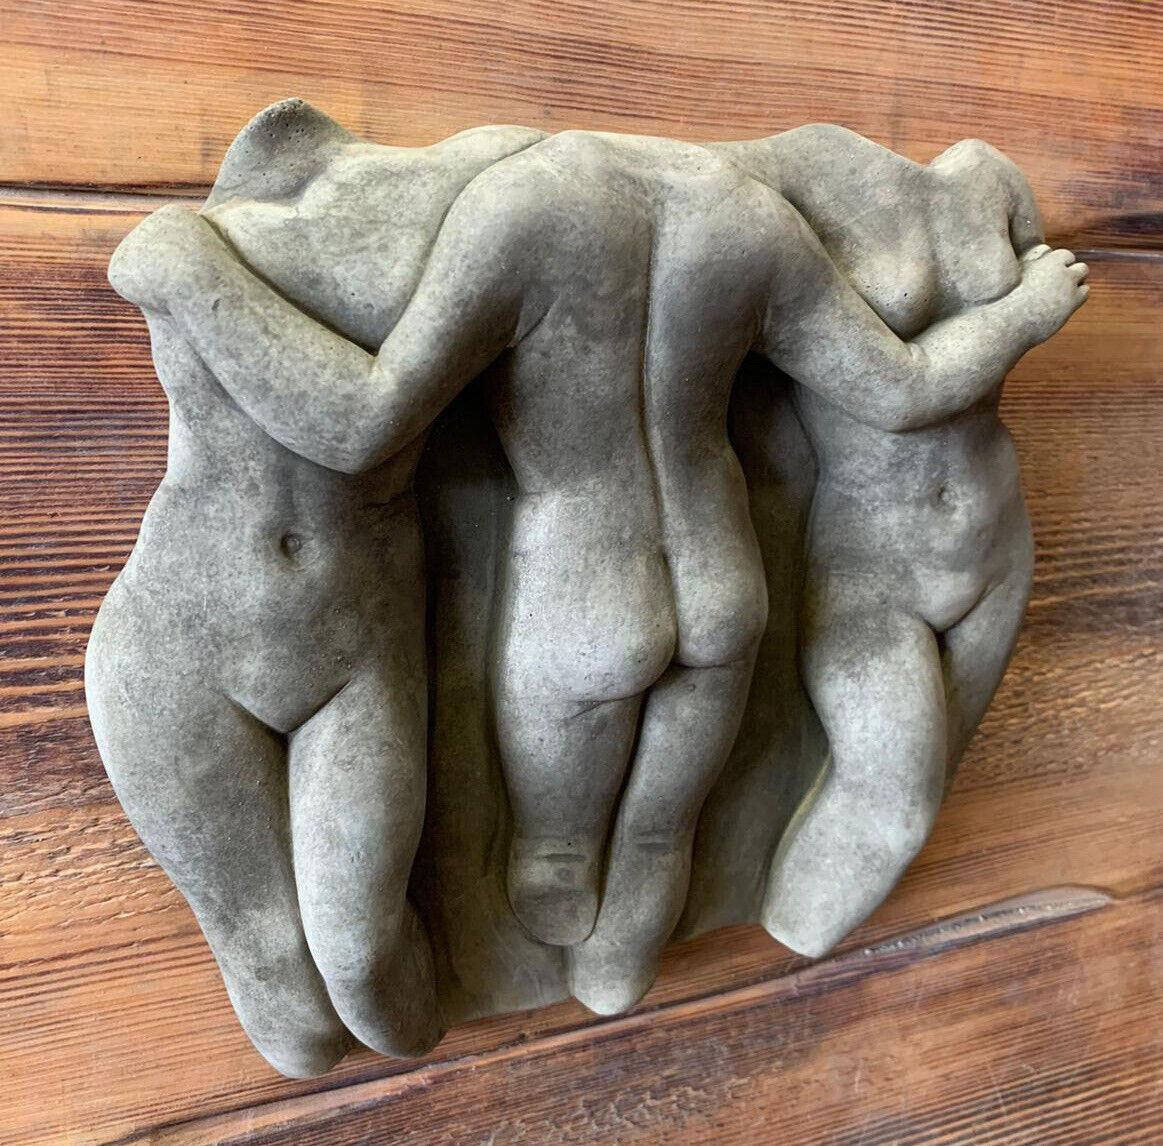 STONE GARDEN 3 TRIO NUDE NAKED LADY WOMAN WALL PLAQUE ORNAMENT